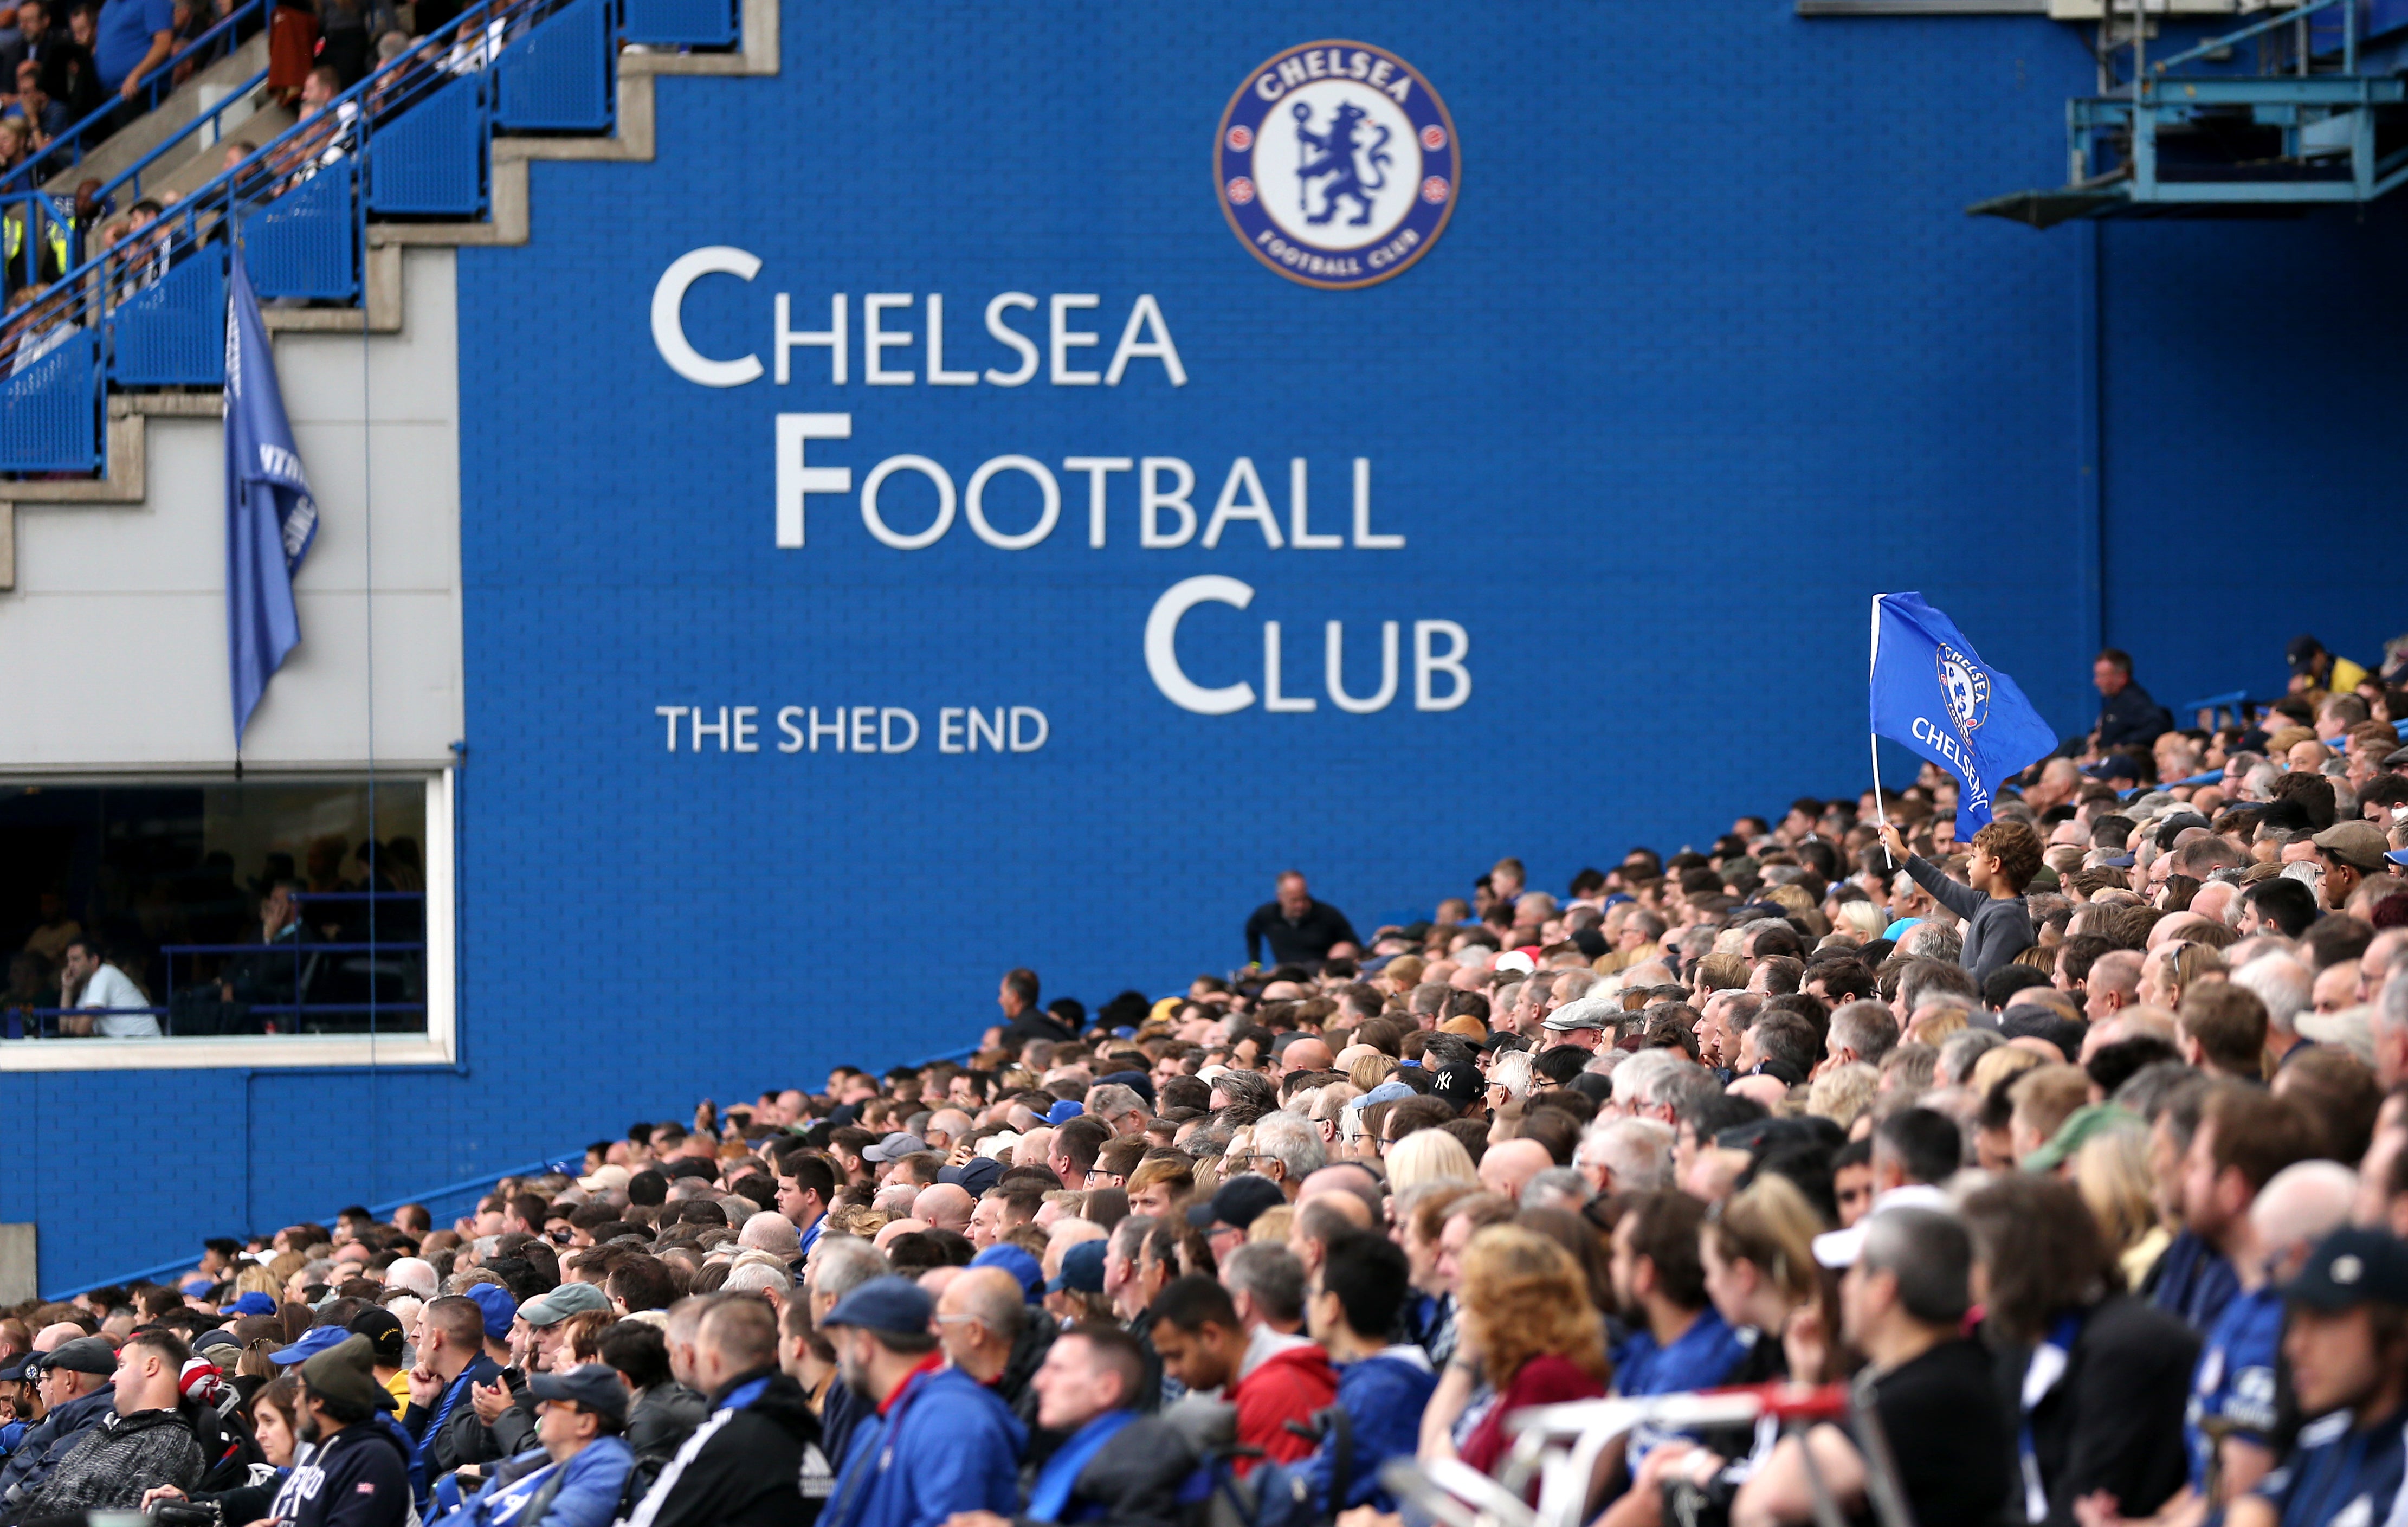 Chelsea could be allowed to sell tickets to fans again